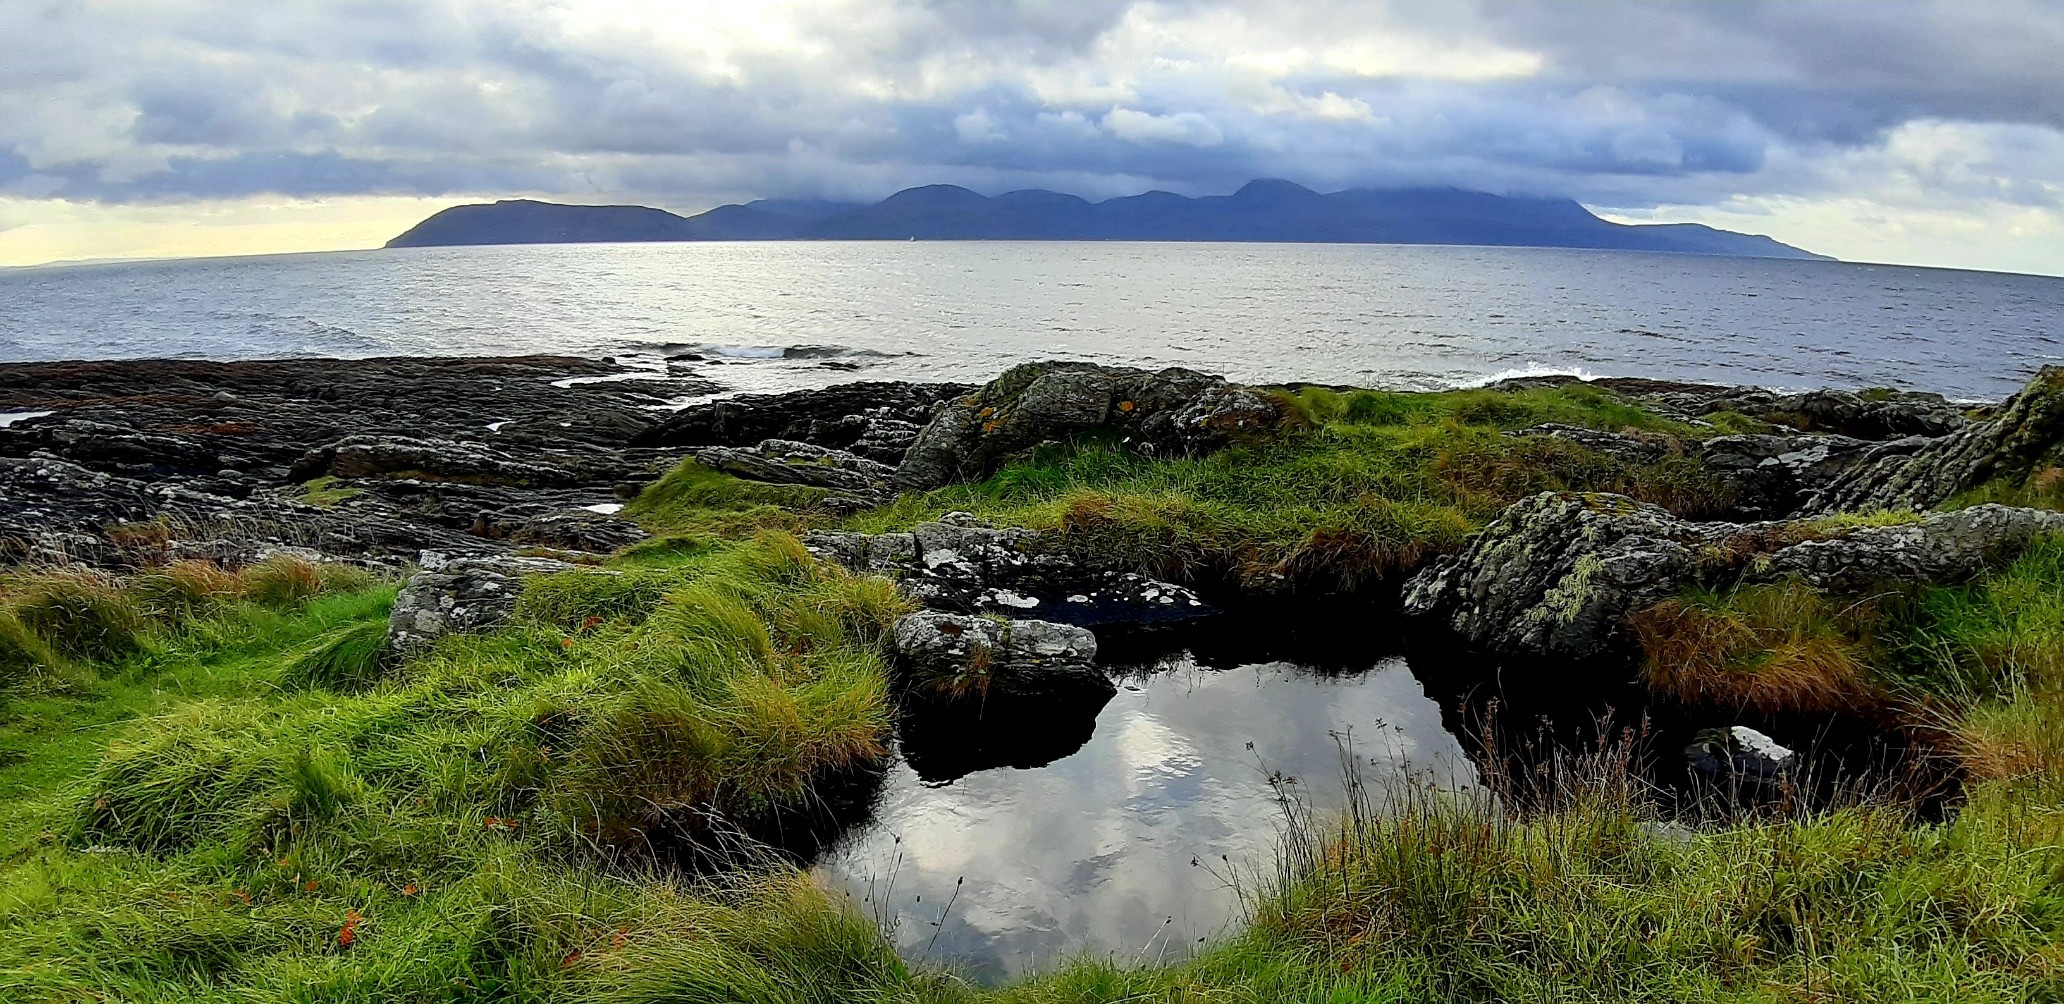 Looking across Kilbrannan Sound from Claonaig to the Isle of Arran. A pool in the foreground, surrounded by grass and schist, reflects the cloudy sky.